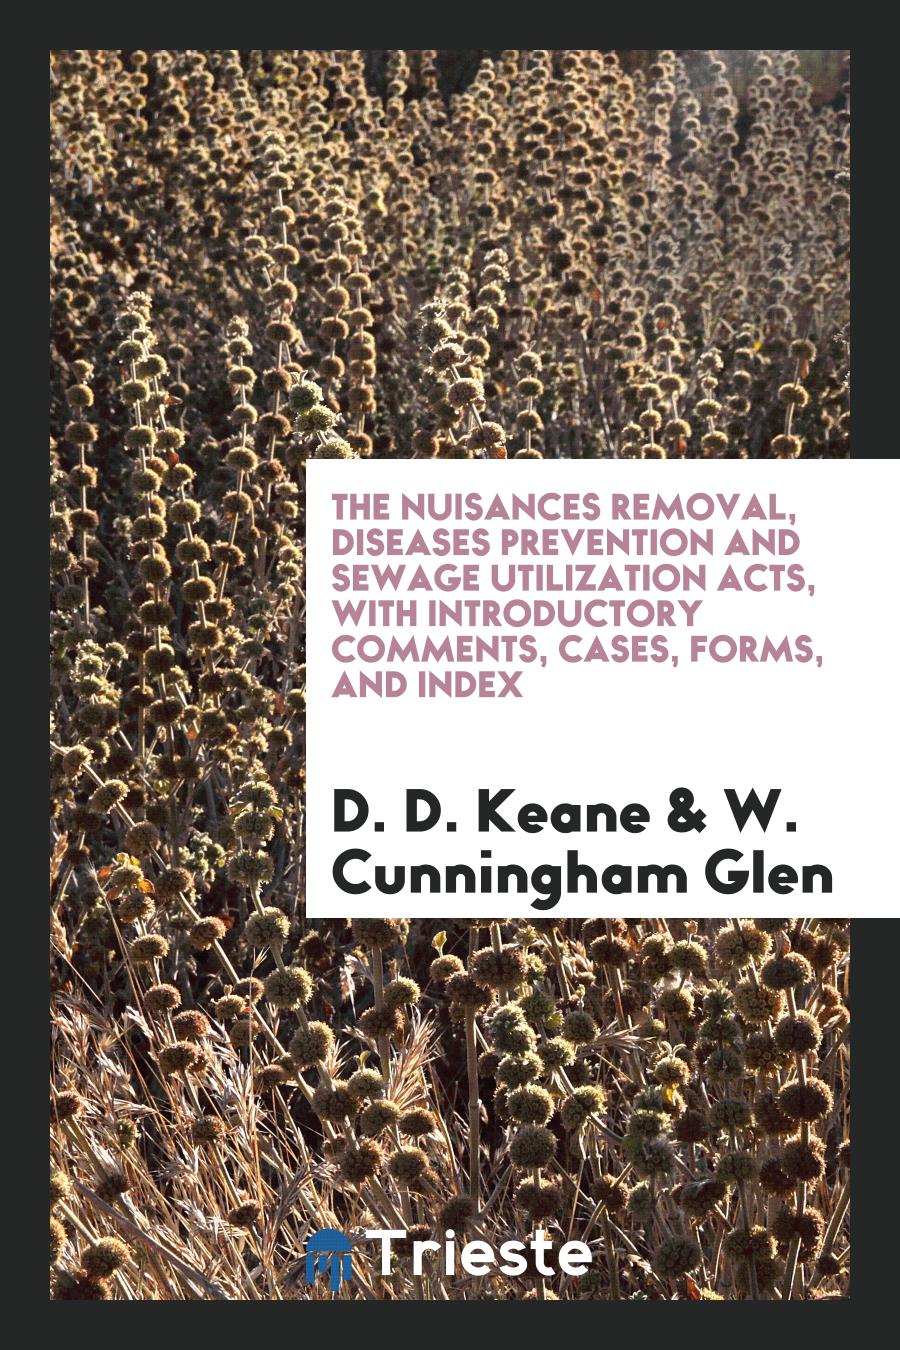 The Nuisances Removal, Diseases Prevention and Sewage Utilization Acts, with Introductory Comments, Cases, Forms, and Index